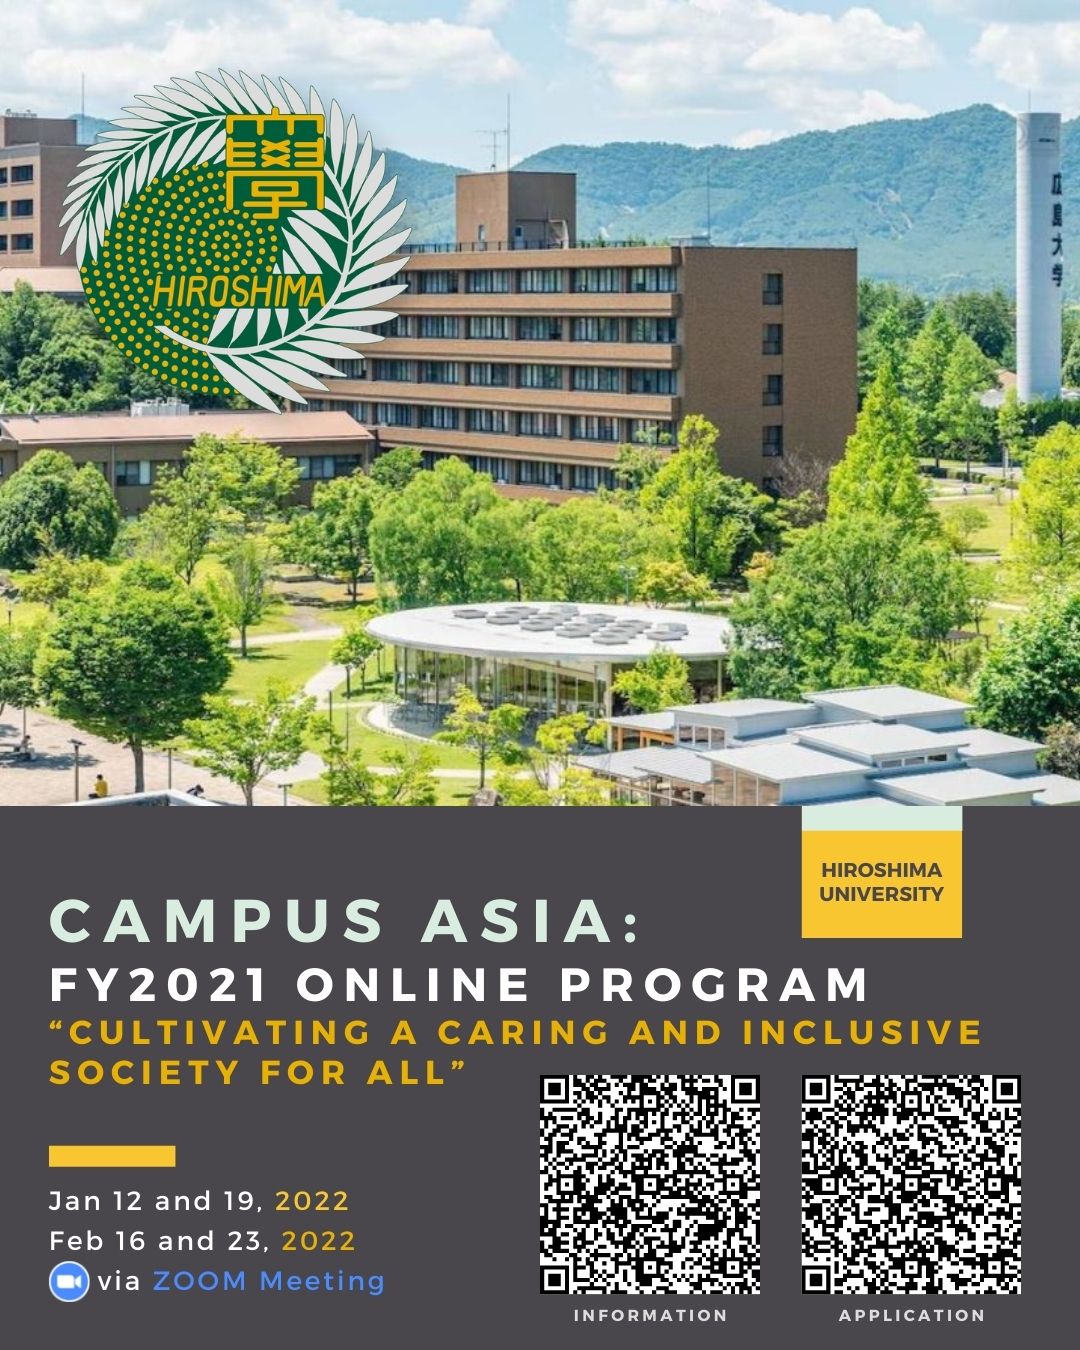 CAMPUS ASIA: FY2021 Online Program “Cultivating a Caring and Inclusive Society for All”